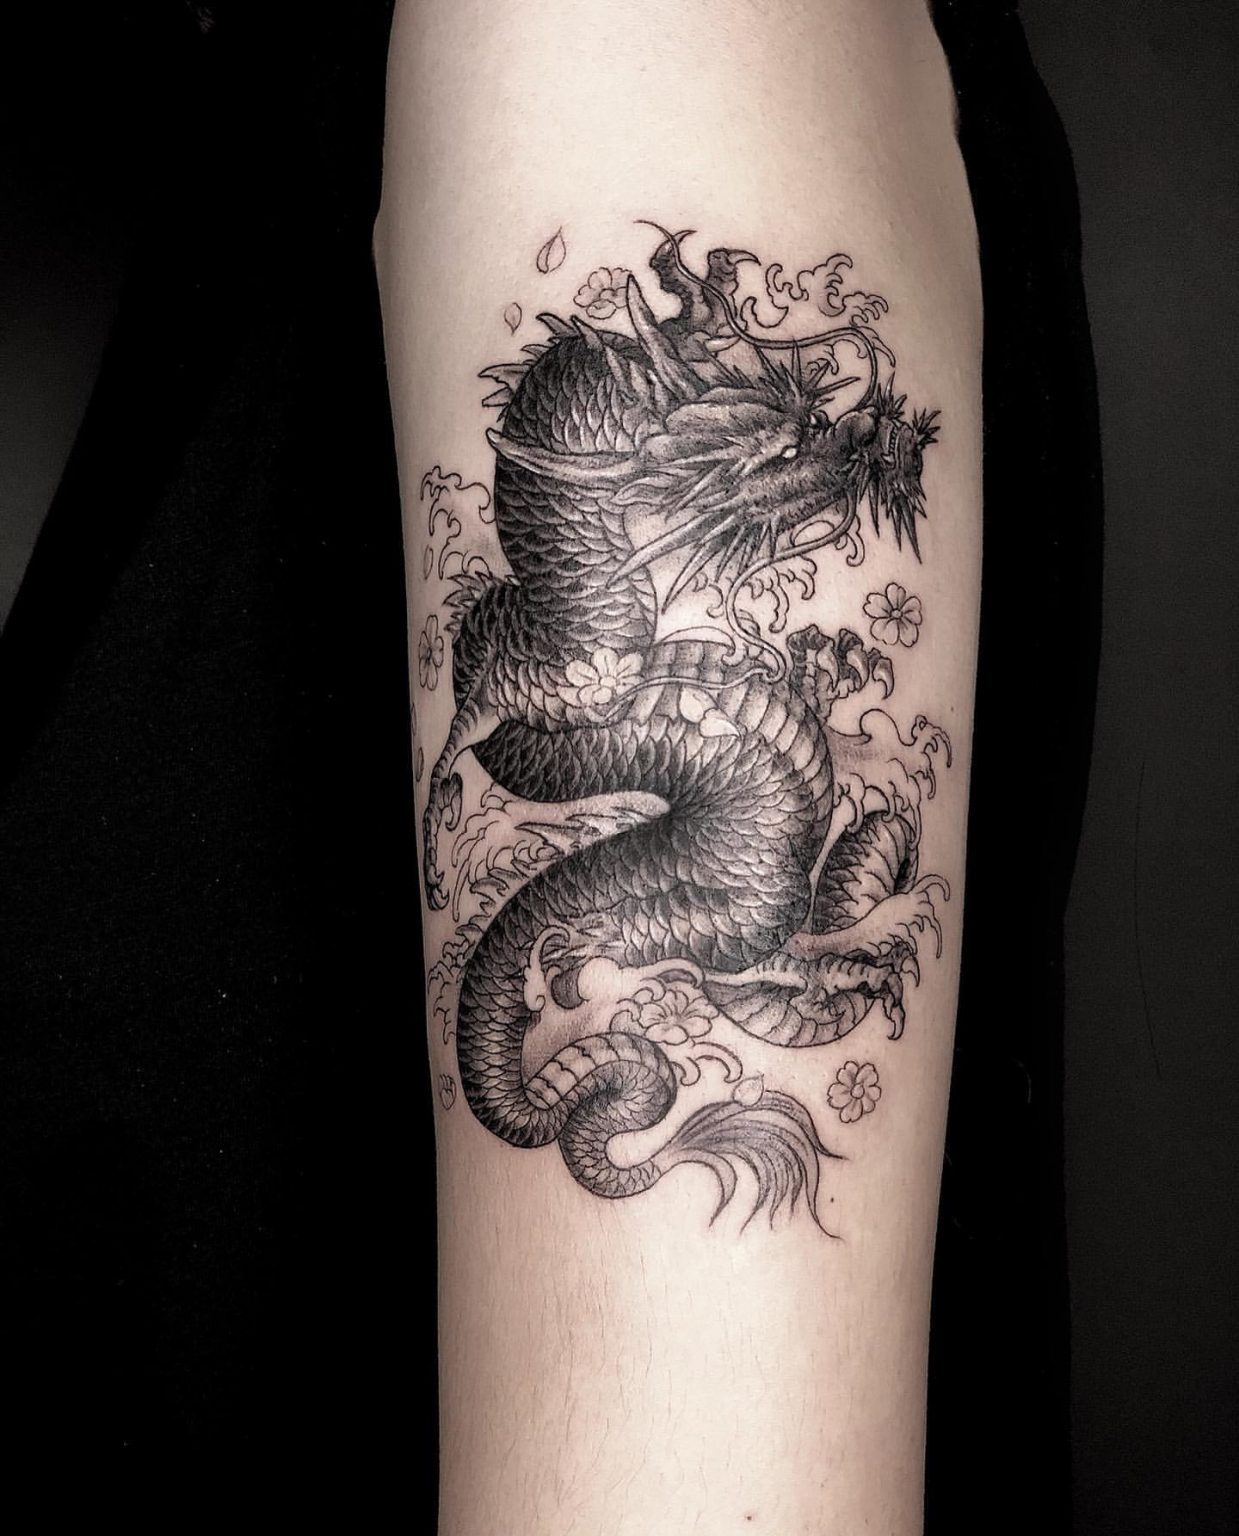 30+ Dragon Tattoo Designs to Inspire You